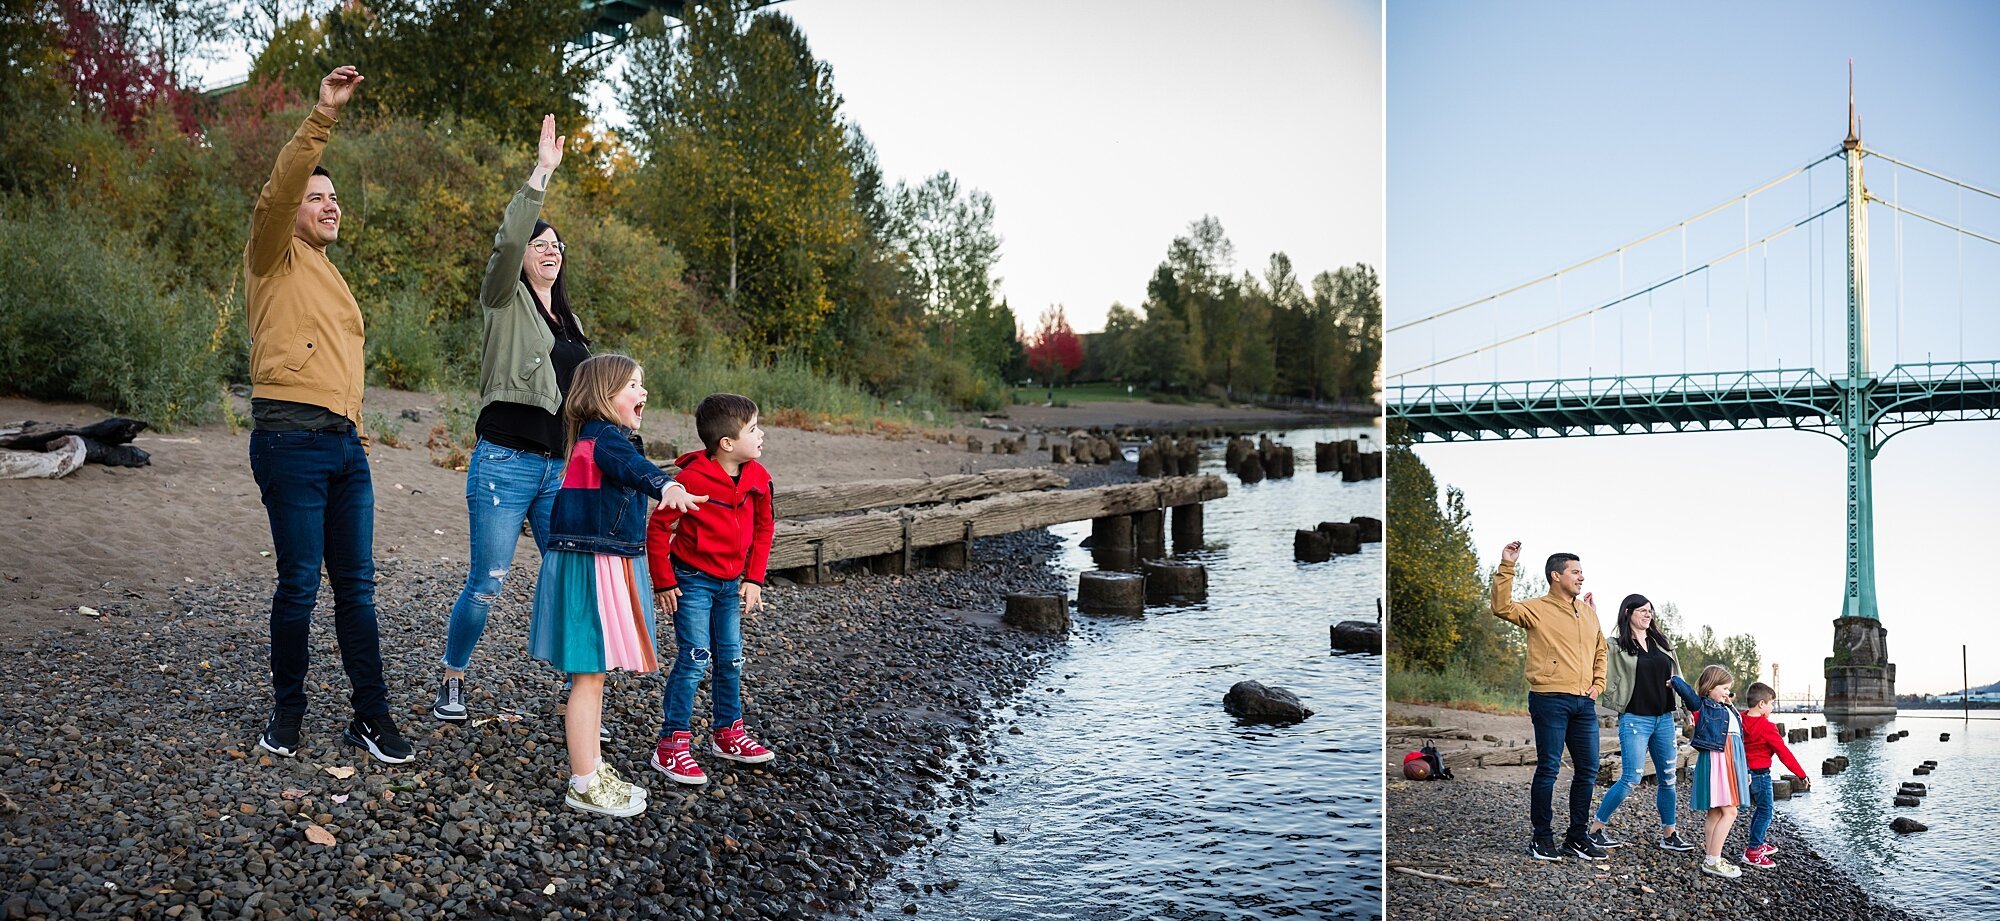 Cathedral_Park_Waterfront_Family_Session_Hunnicutt_Photography_Portland_Oregon_0023.jpg